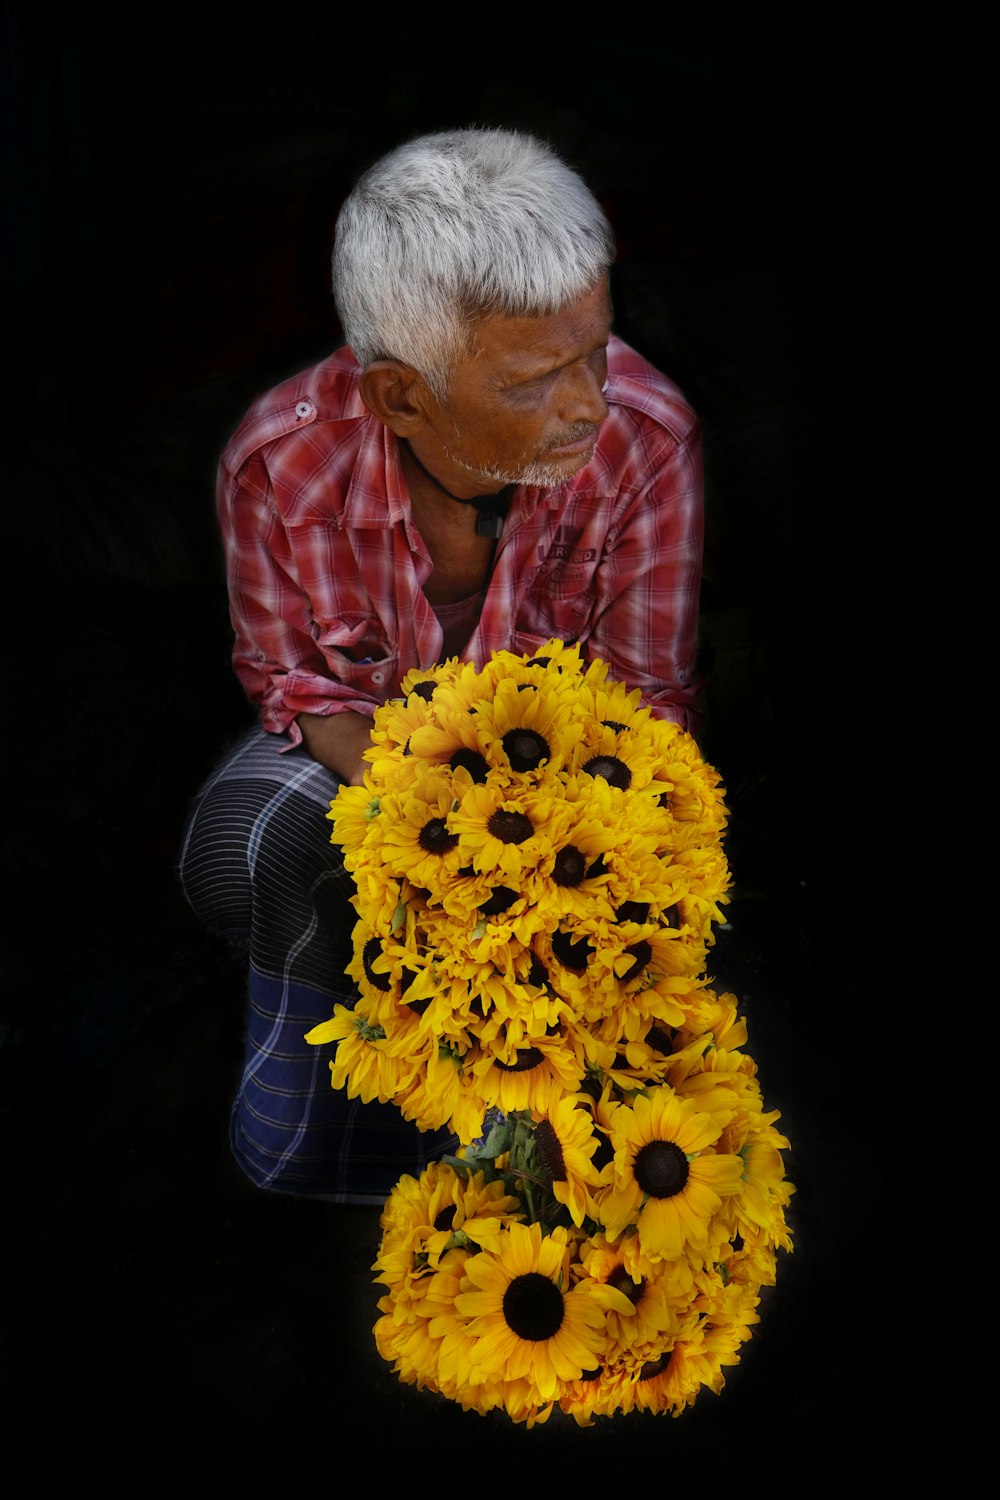 a man kneeling down with a bunch of sunflowers